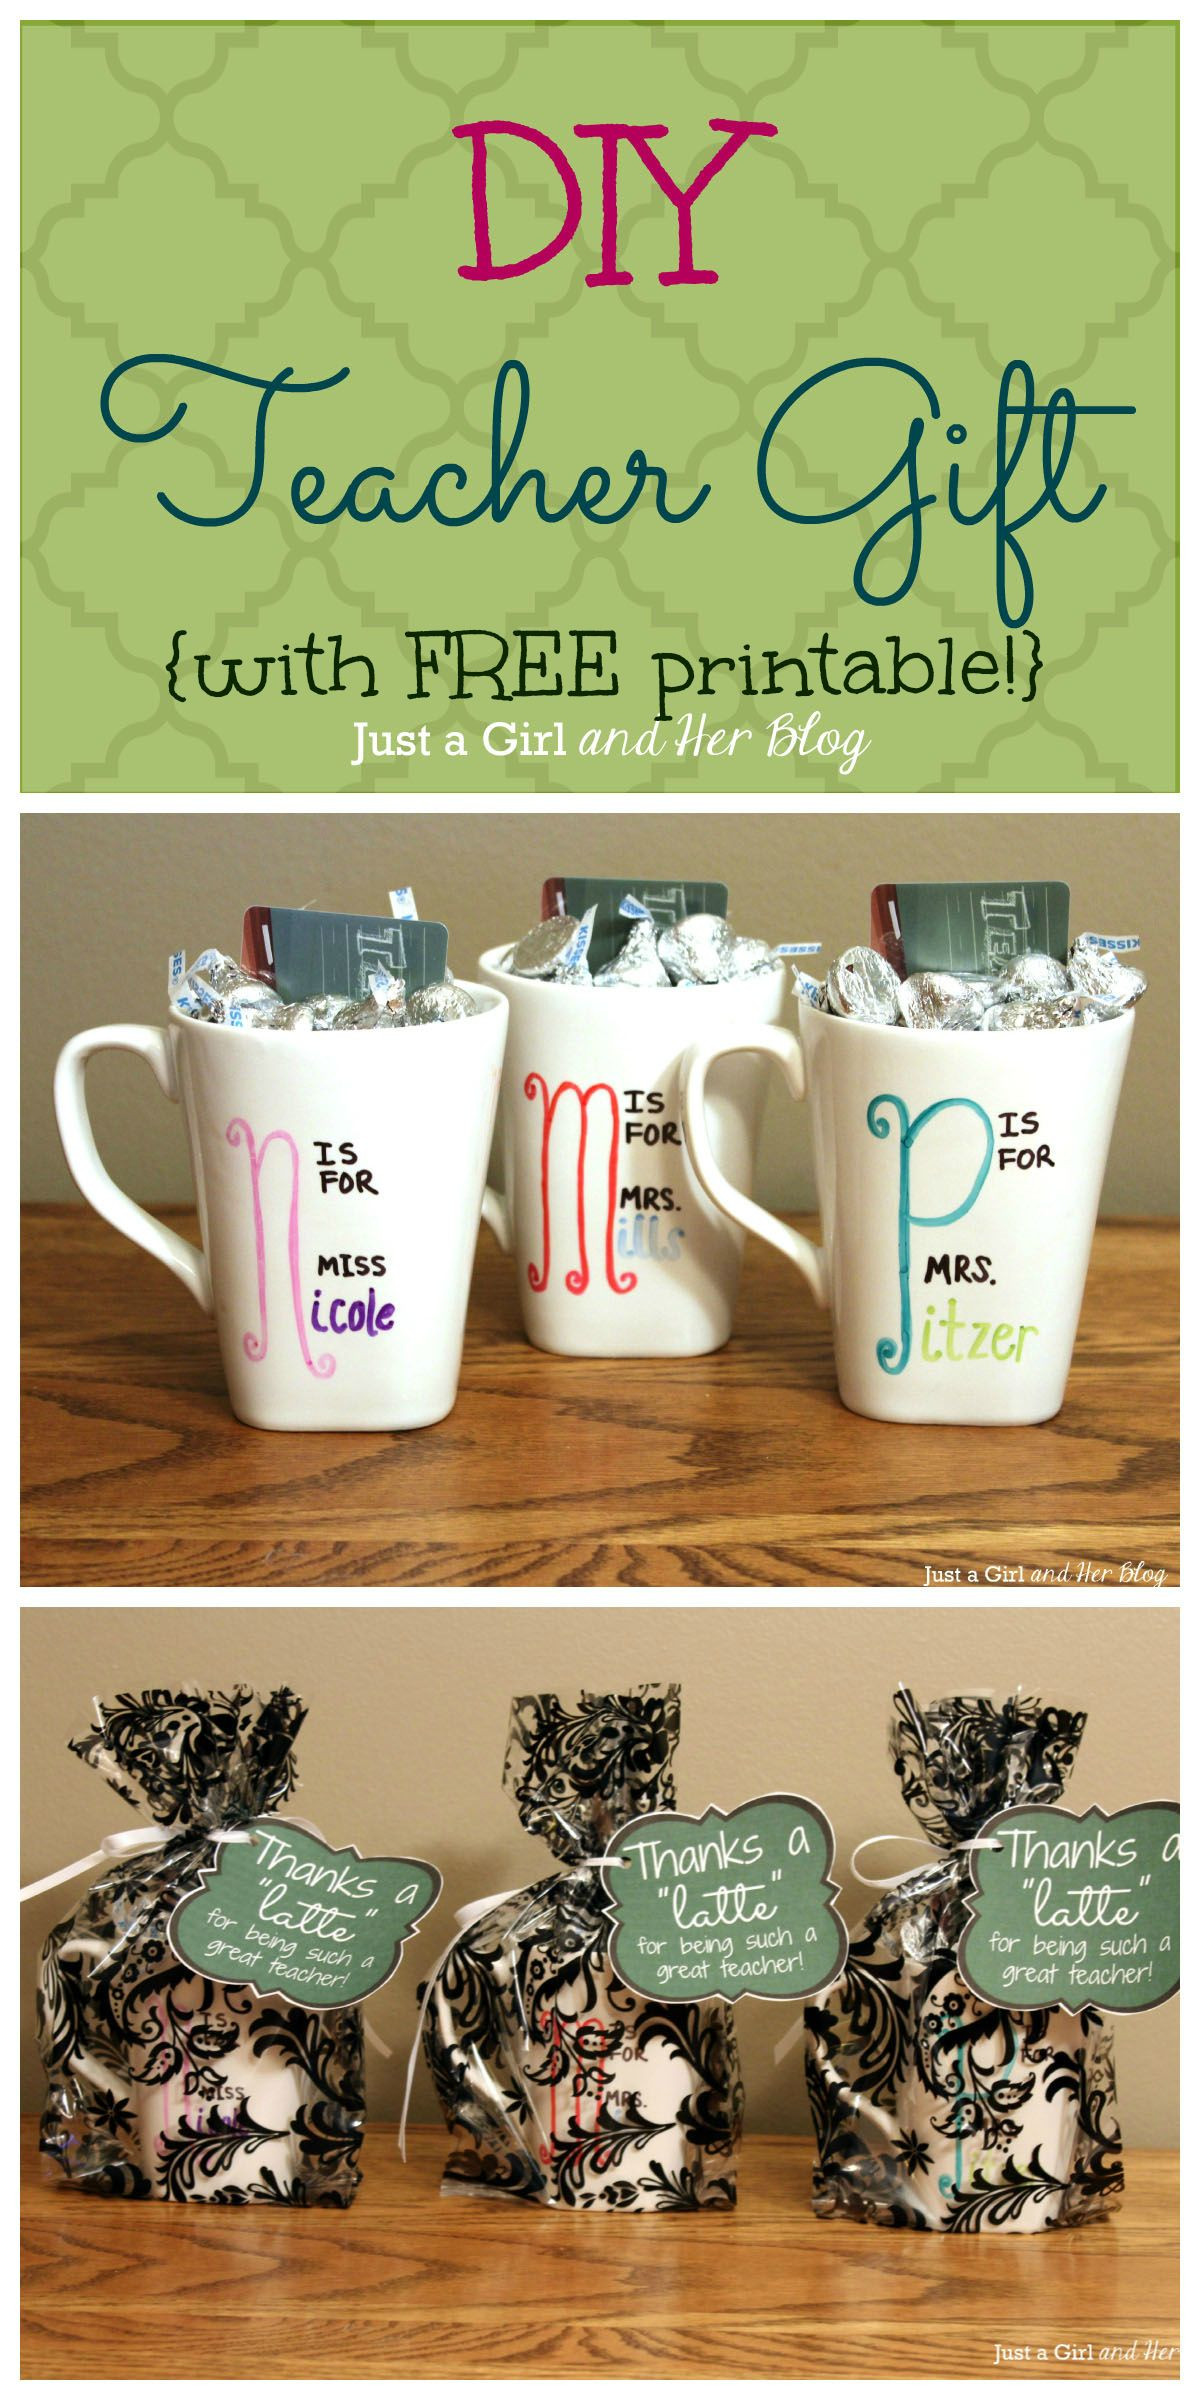 Christmas Gift Ideas For Daycare Teachers
 Last Minute Mama DIY Teacher Gift with FREE Printable